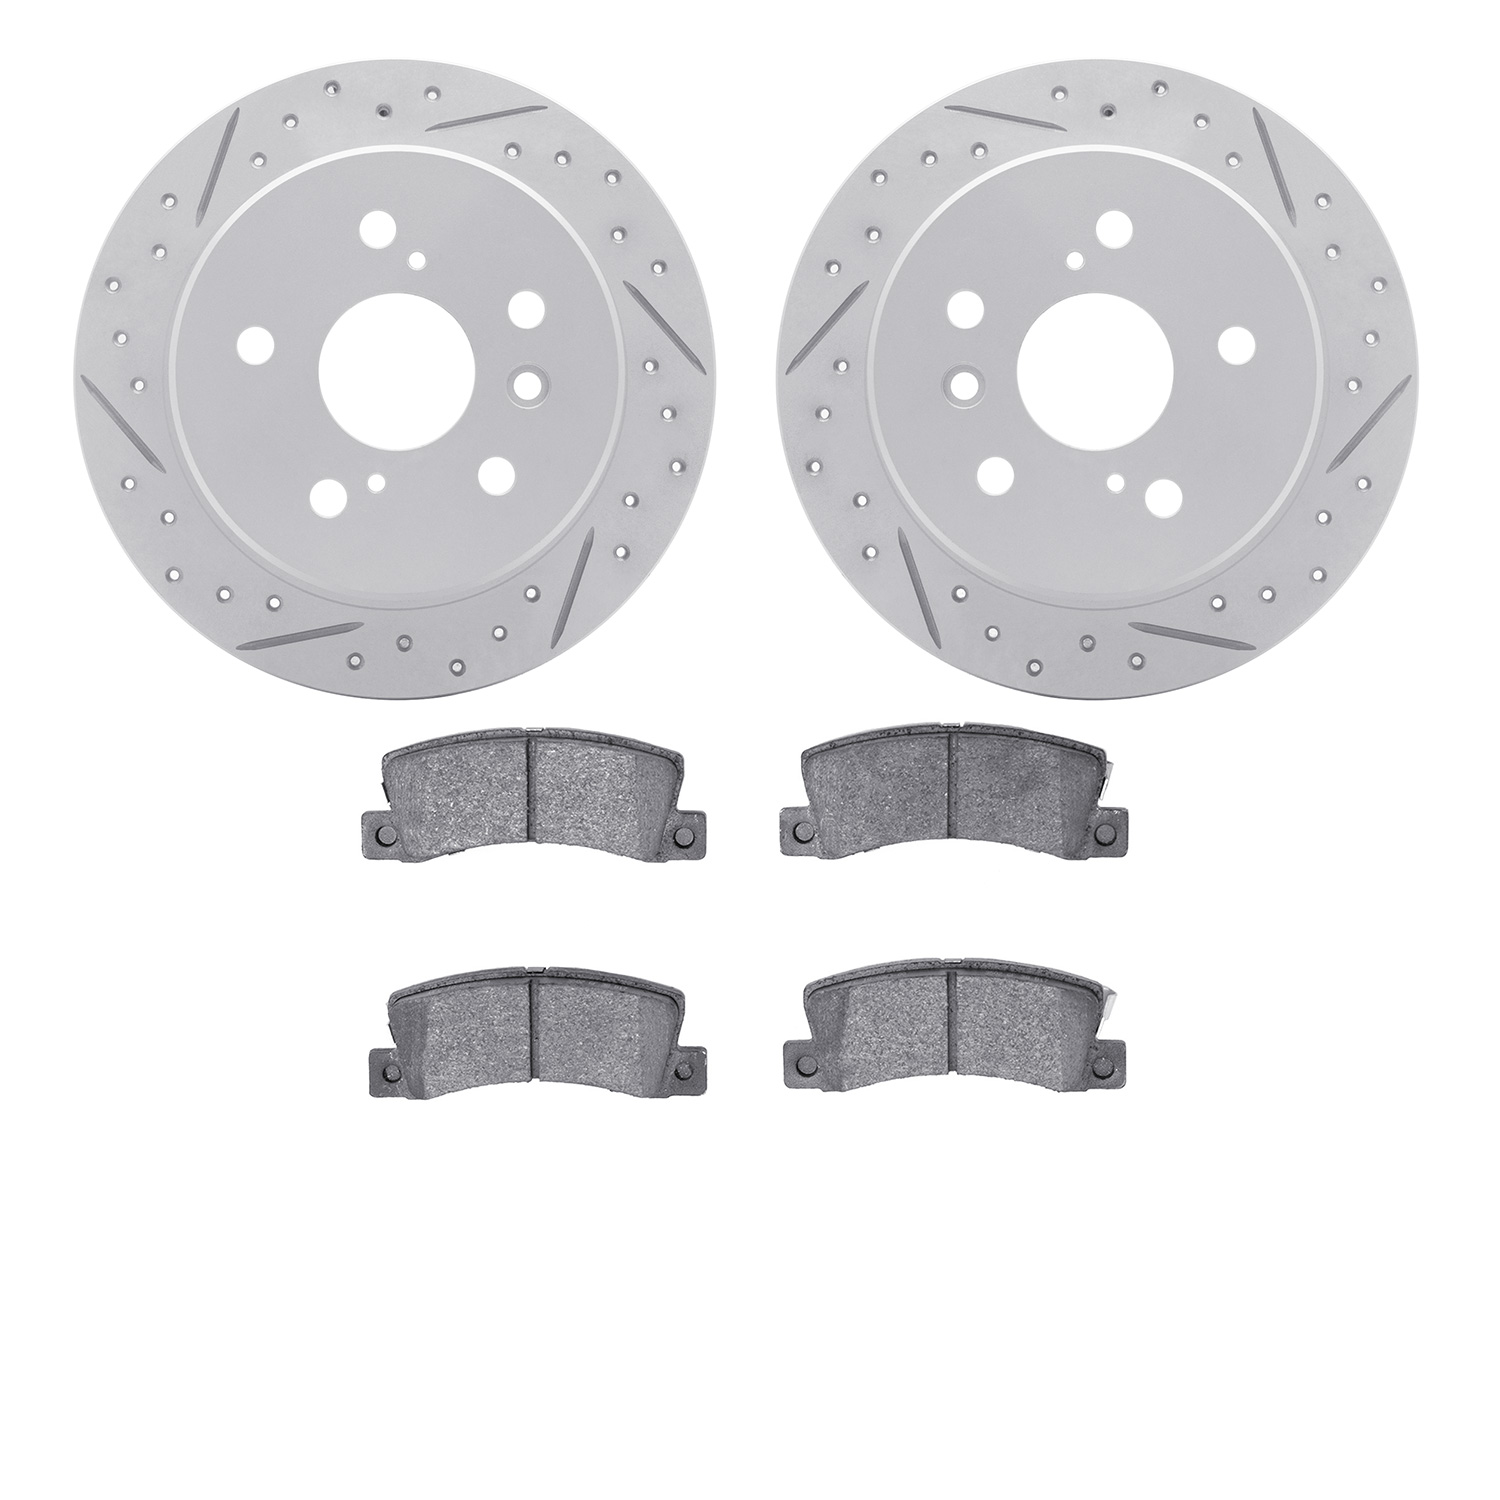 2502-76004 Geoperformance Drilled/Slotted Rotors w/5000 Advanced Brake Pads Kit, 1992-1999 Lexus/Toyota/Scion, Position: Rear